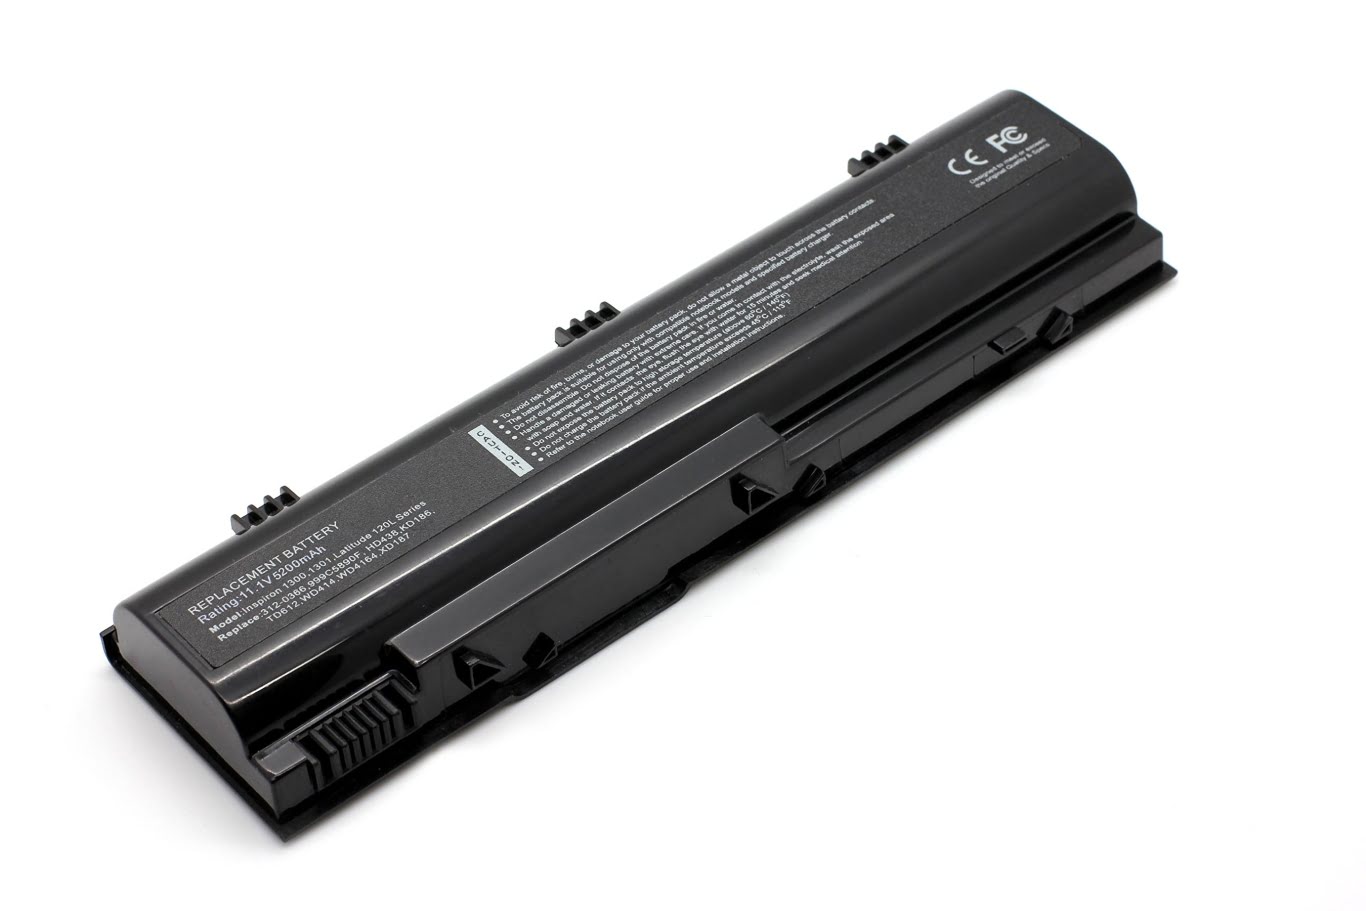 0HD438, 0HJ481 replacement Laptop Battery for Dell Inspiron 1300, Inspiron B120, 6 cells, 10.8V, 4400mah/49wh